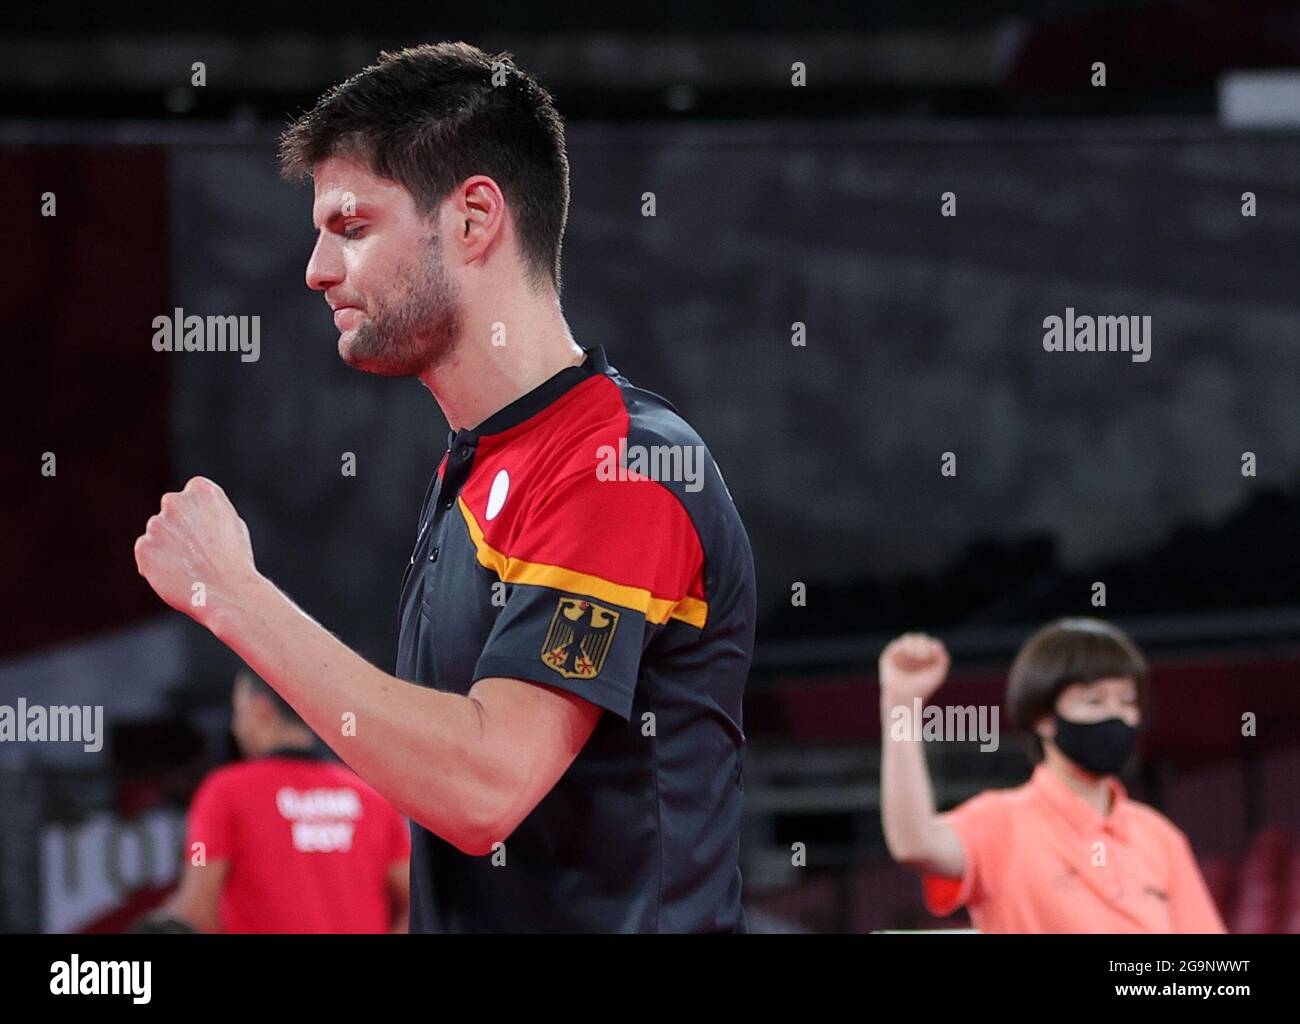 Tokyo, Japan. 27th July, 2021. Dimitrij Ovtcharov of Germany celebrates after winning the table tennis men's singles round of 16 match against Koki Niwa of Japan at the Tokyo 2020 Olympic Games in Tokyo, Japan, July 27, 2021. Credit: Wang Dongzhen/Xinhua/Alamy Live News Stock Photo